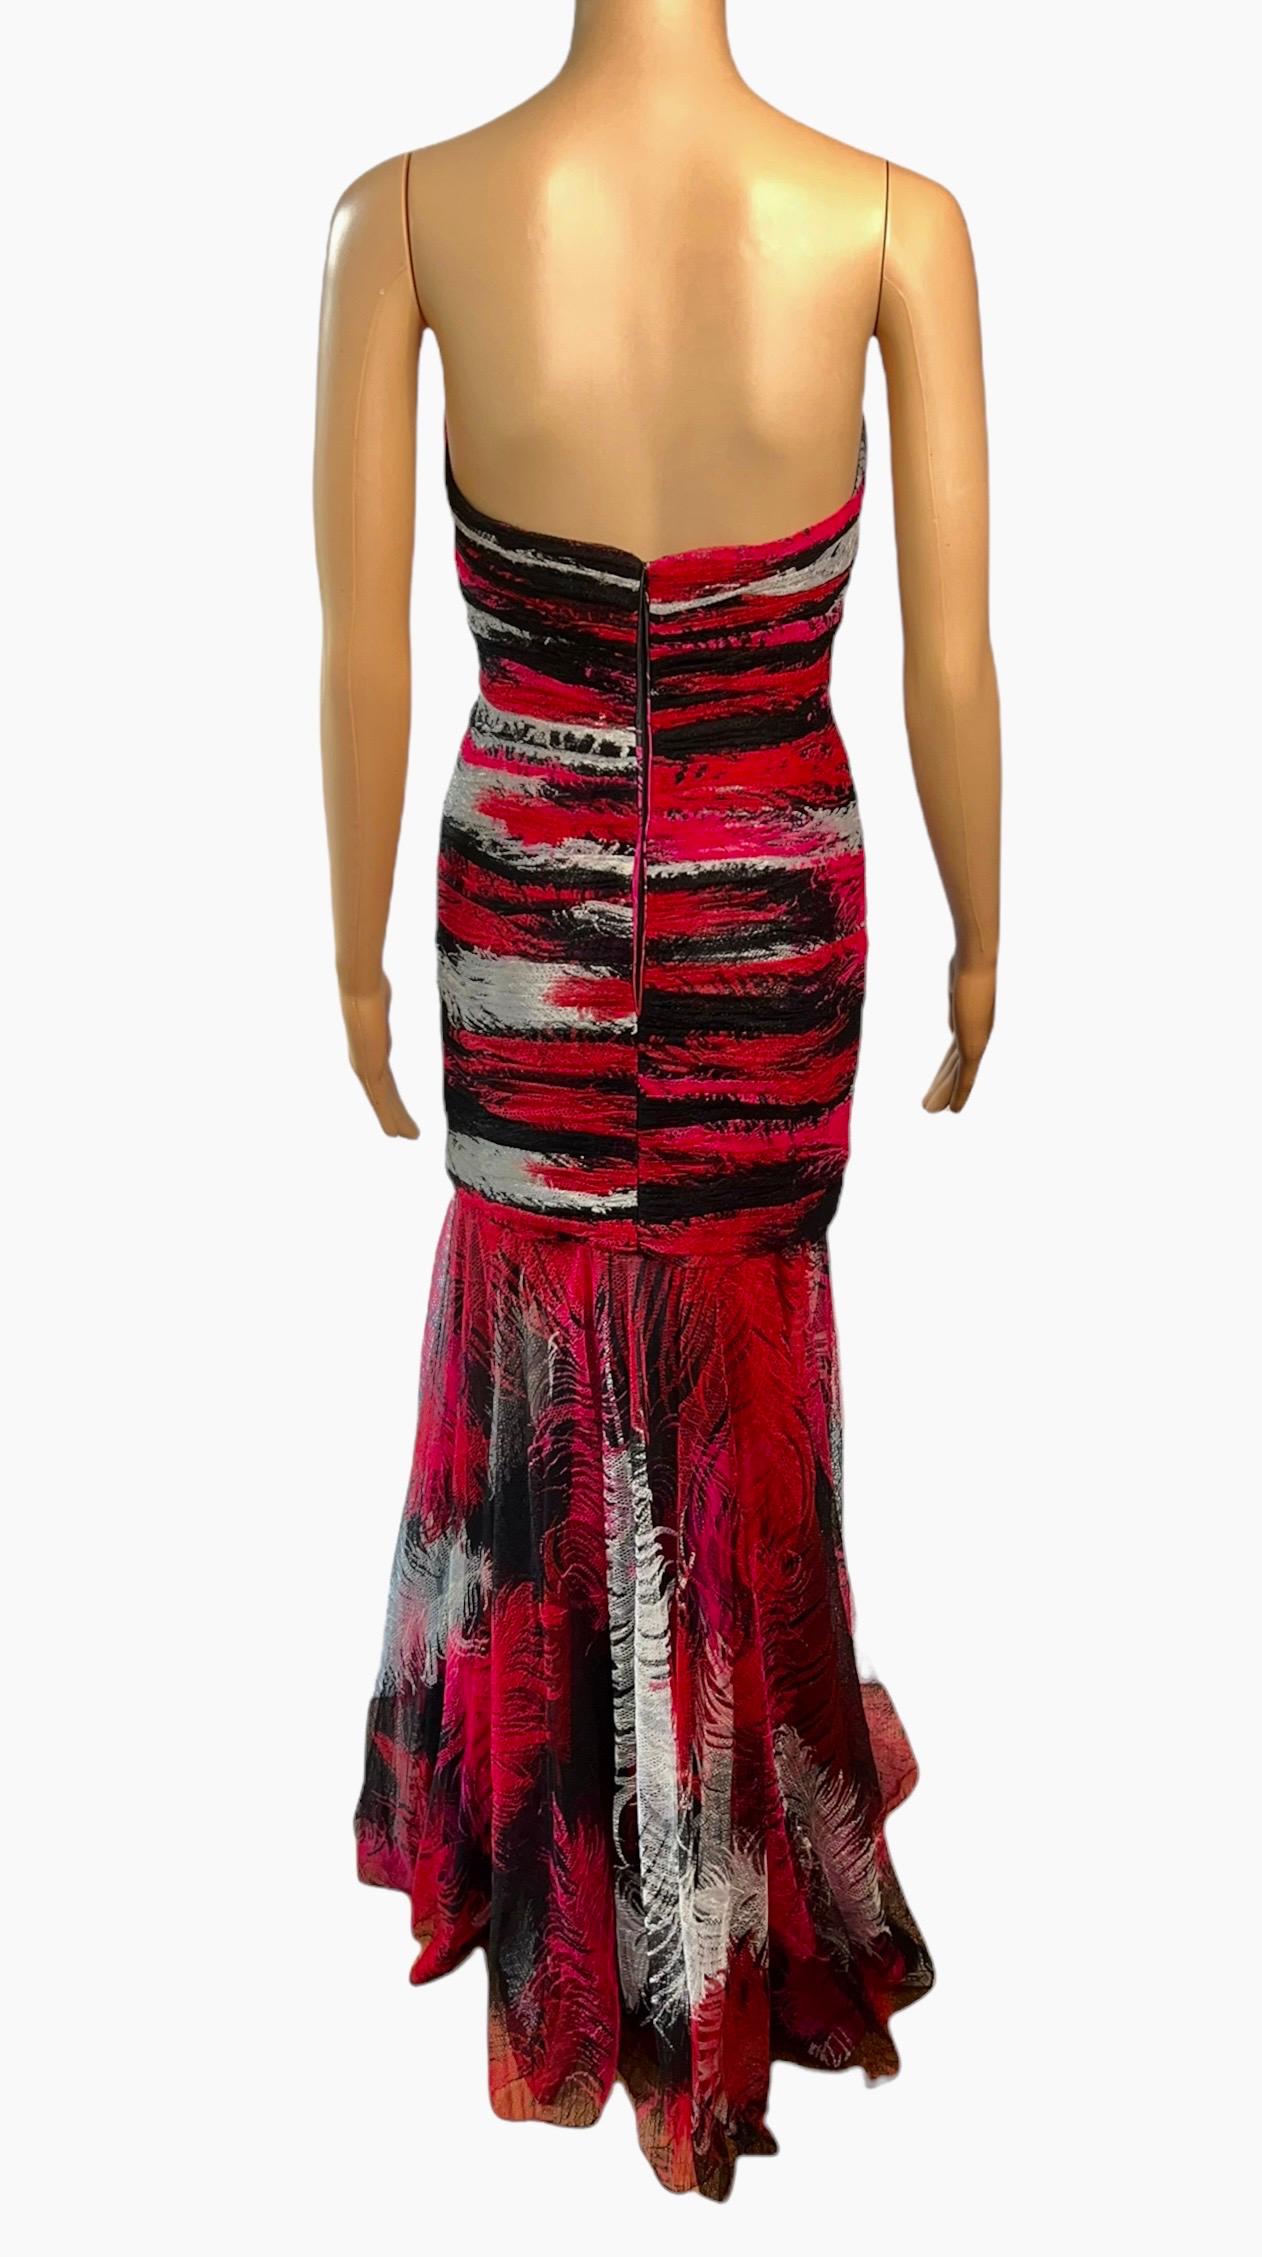 Gianni Versace F/W 2001 Runway Bustier Feather Print Silk Evening Dress Gown For Sale 2